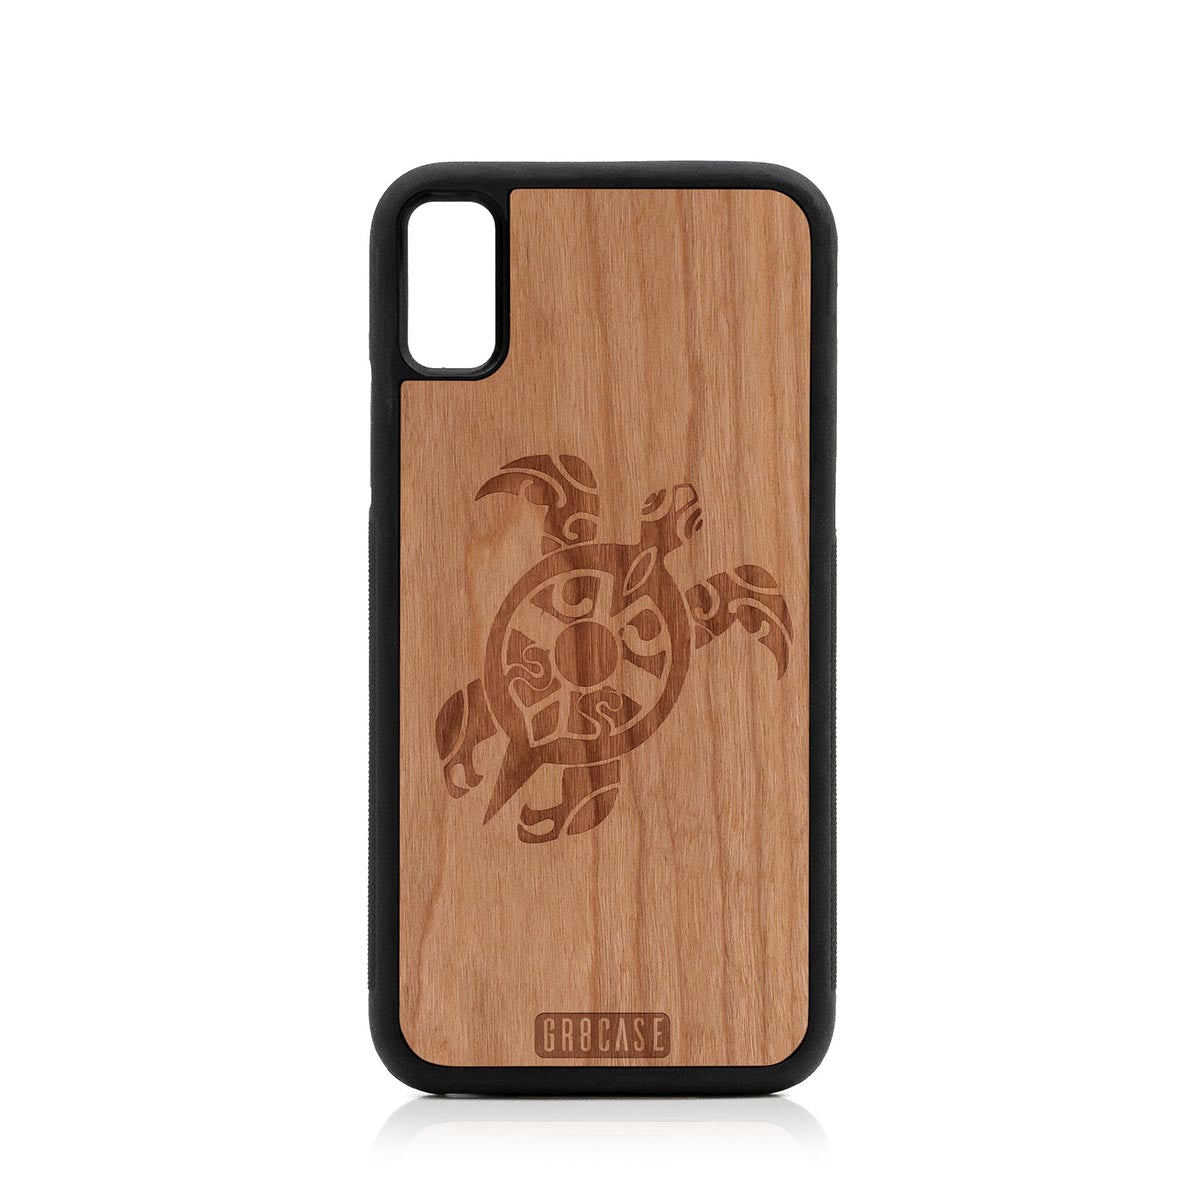 Turtle Design Wood Case For iPhone X/XS